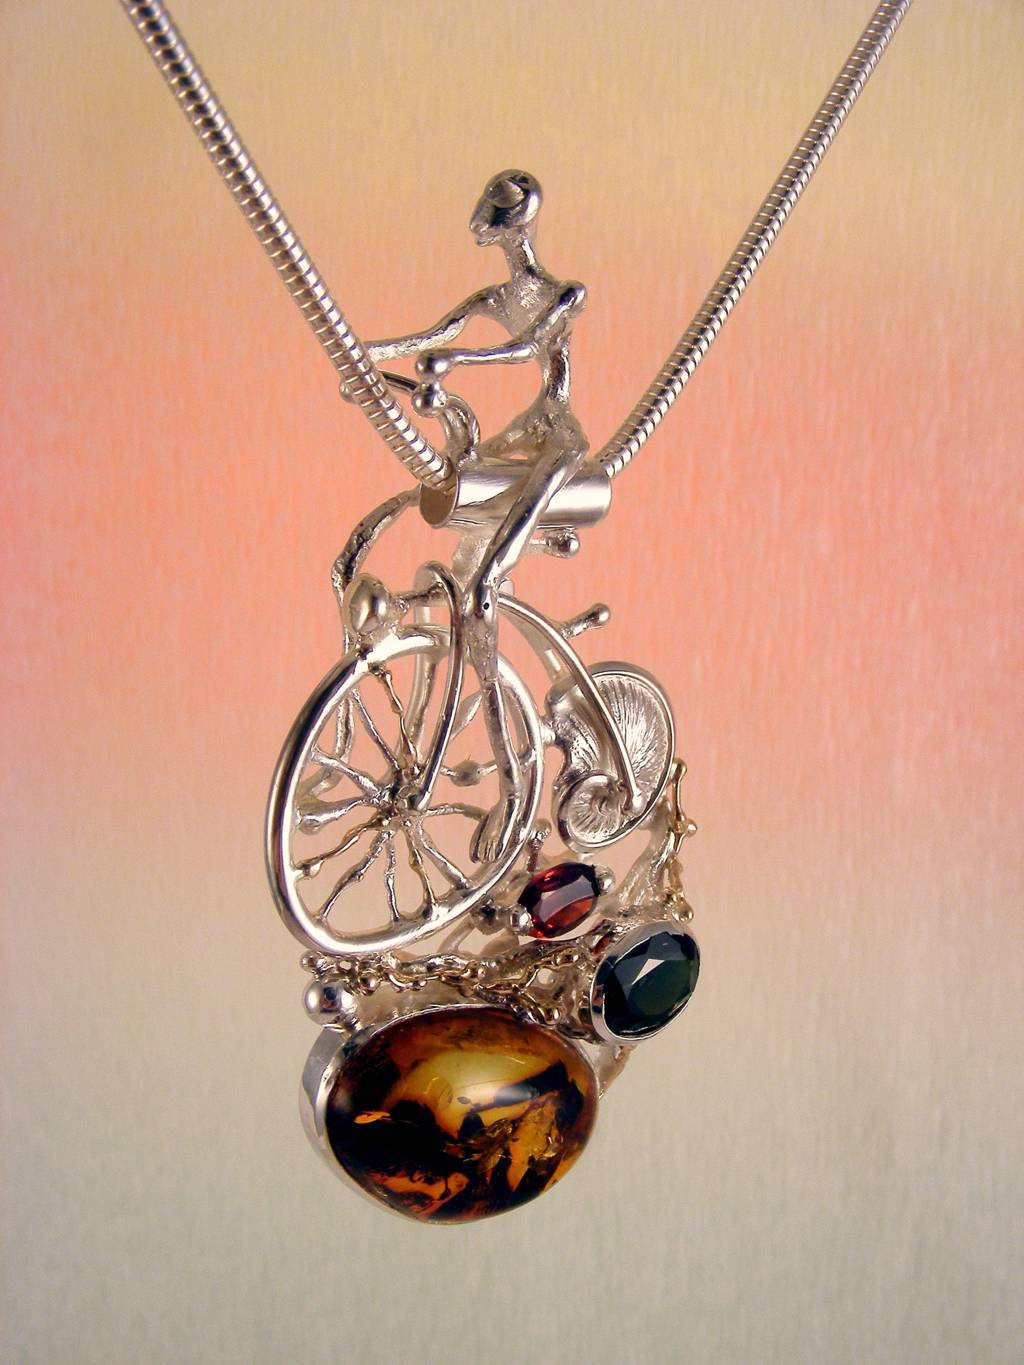 gregory pyra piro sculptural pendant 4287, artists during lockdown making handcrafted jewellery, makers during lockdown who make handcrafted jewellery, galleries during lockdown with handcrafted jewellery, historical high wheel bicycle sculptural pendant, pendant with bicycle that has shell wheel, penedant with facted gemstones and amber, pendant with green tourmaline and garnet, jewellery with home delivery in Galway, jewellery with home delivery in Dublin, jewellery with home delivery in Belfast, silver and gold jewelry with gemstones for women